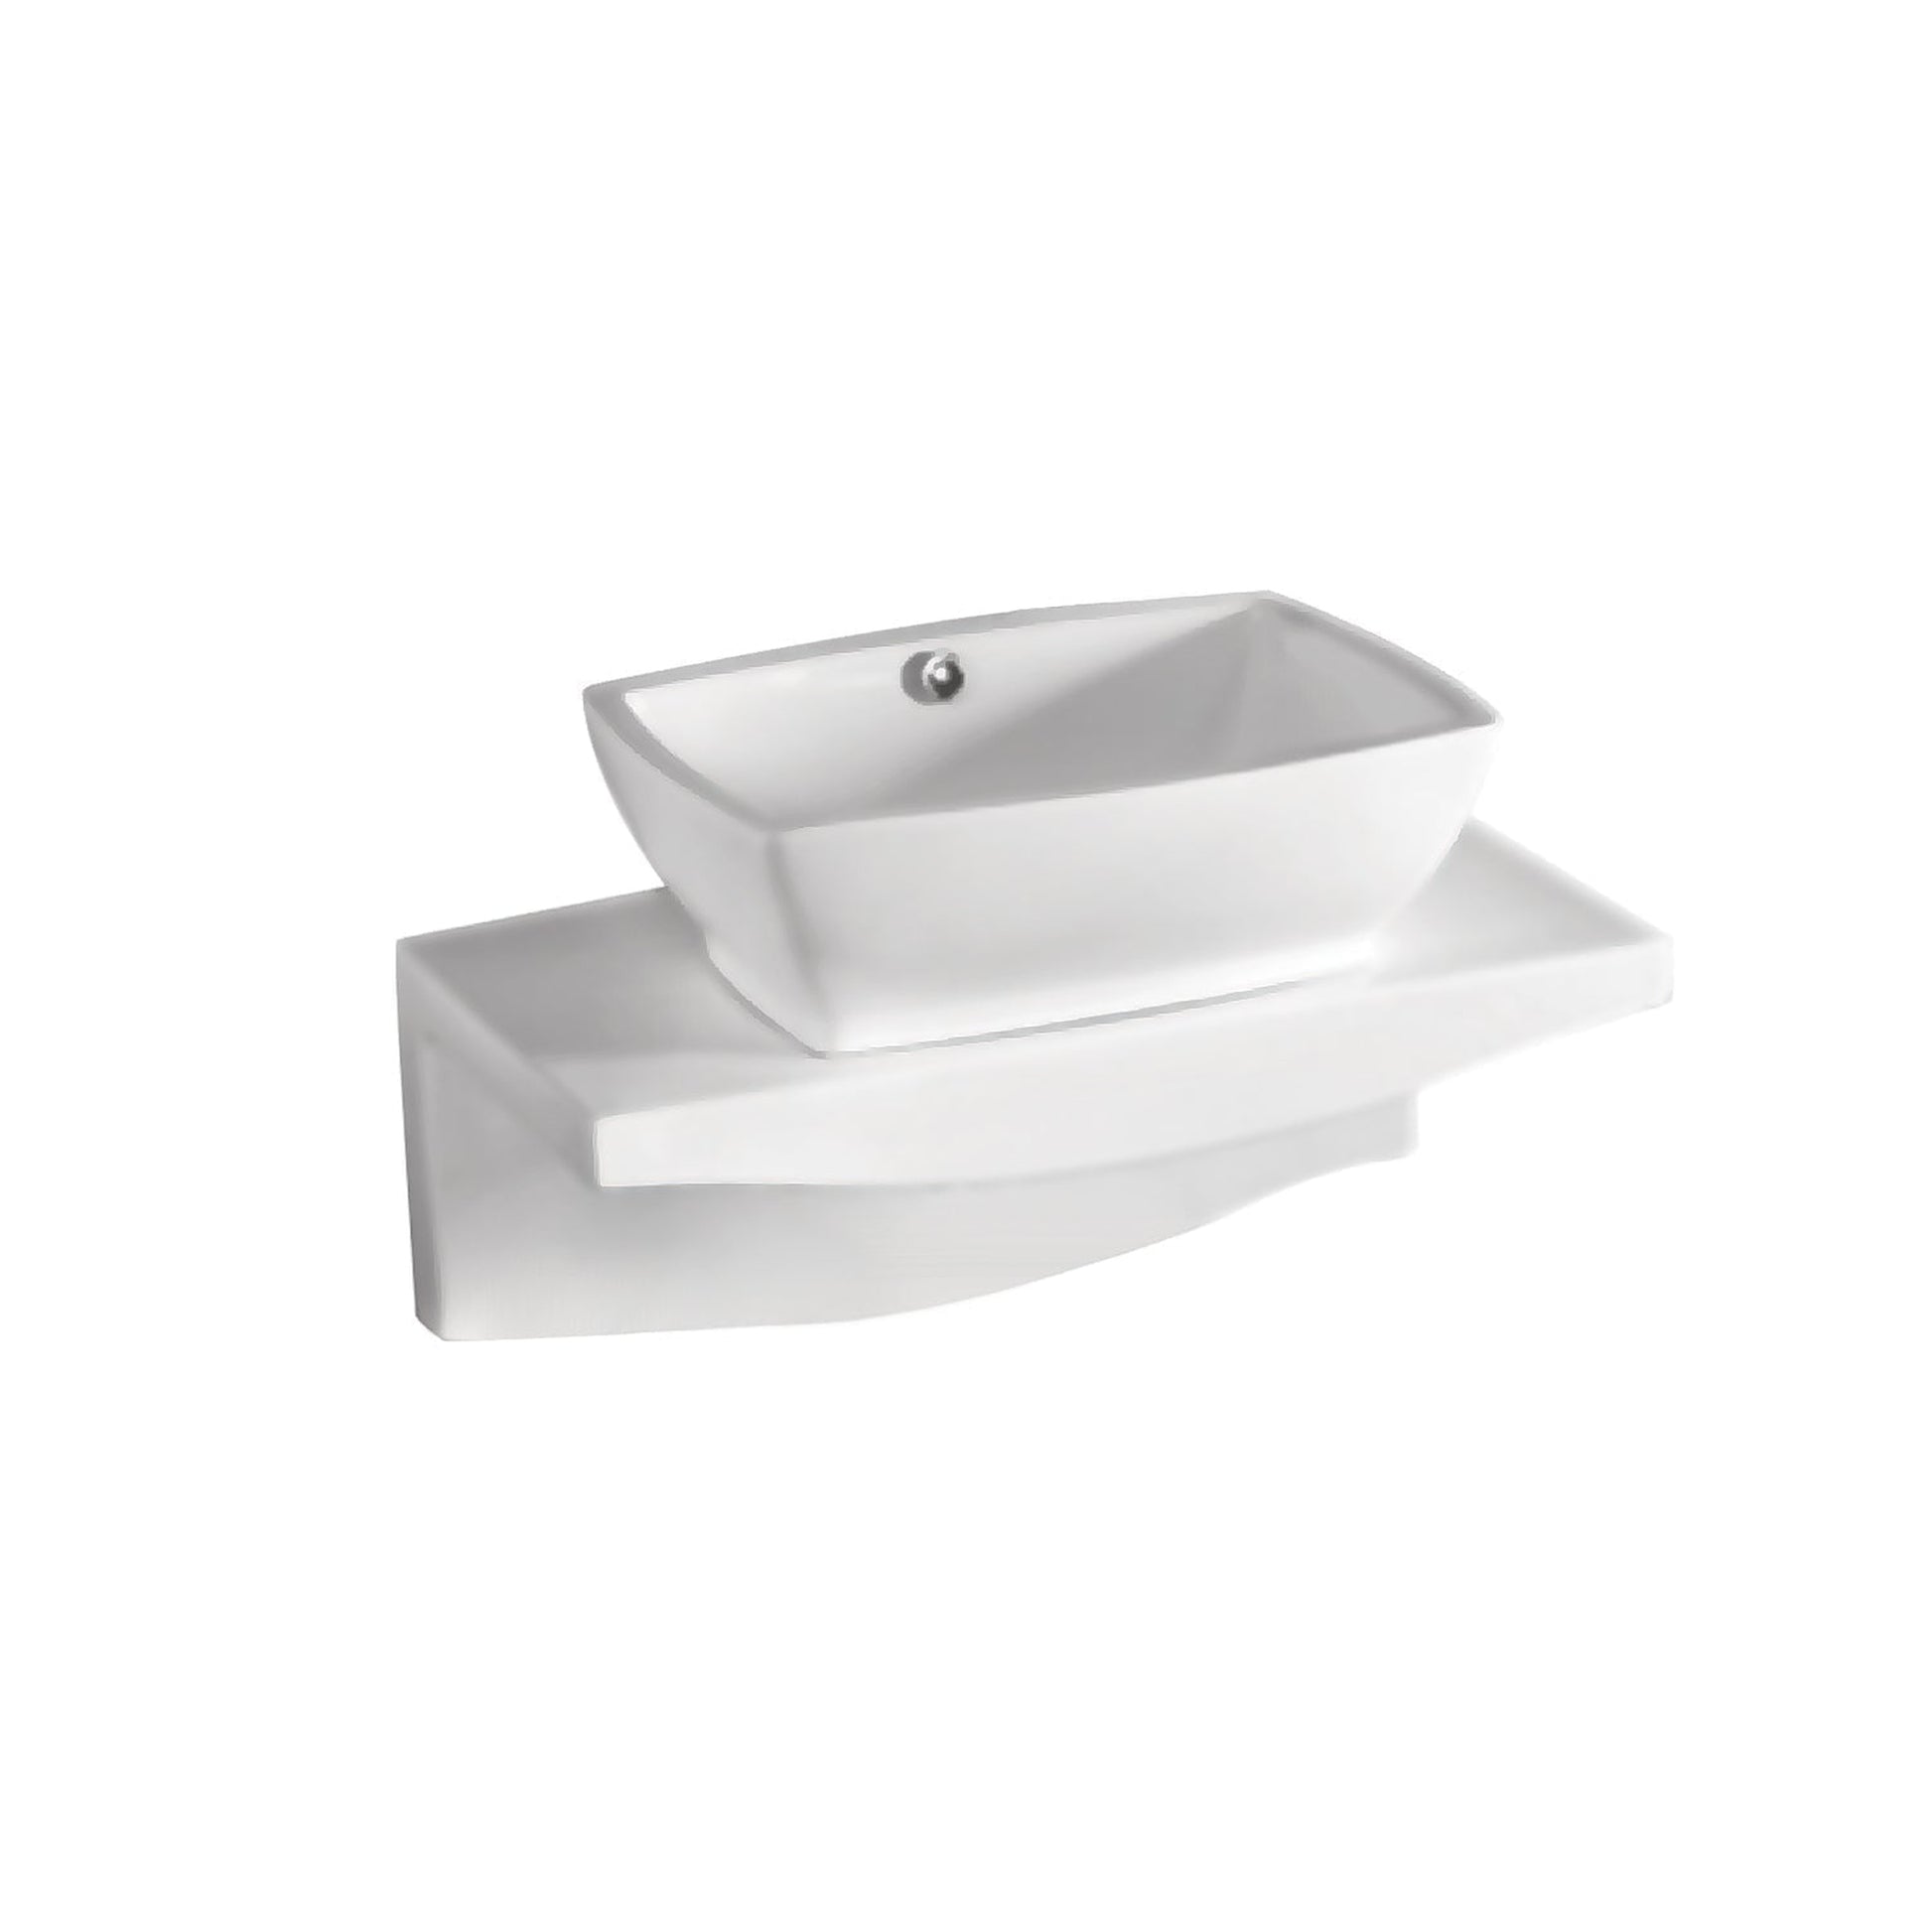 Whitehaus Isabella WHKN1065-1116 White Rectangular Above Mount Basin With Overflow and Center Drain